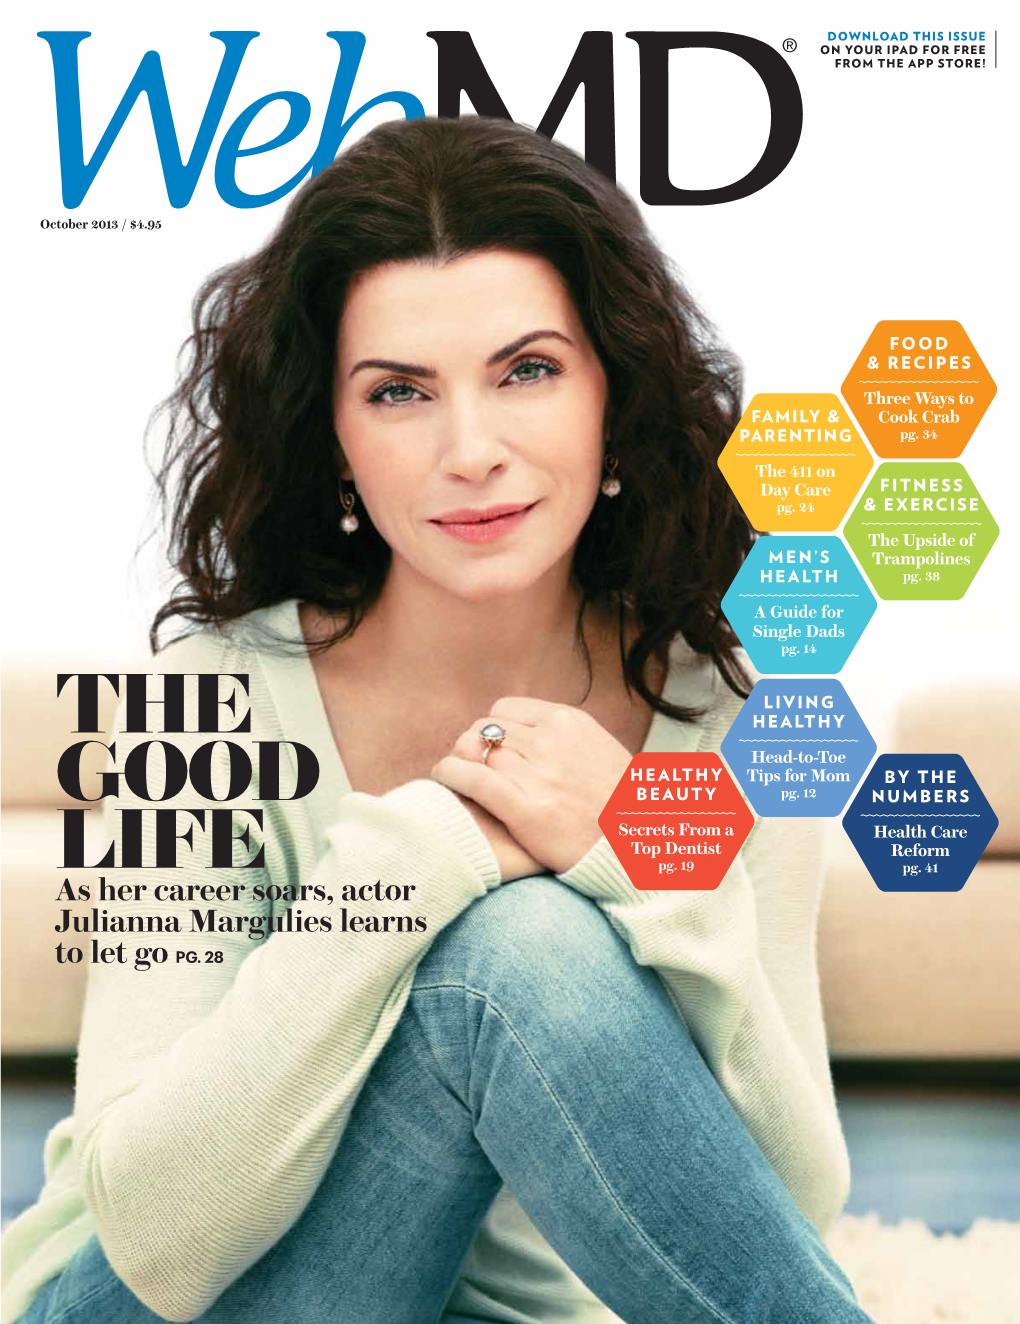 Julianna Margulies Learns to Let Go Pg